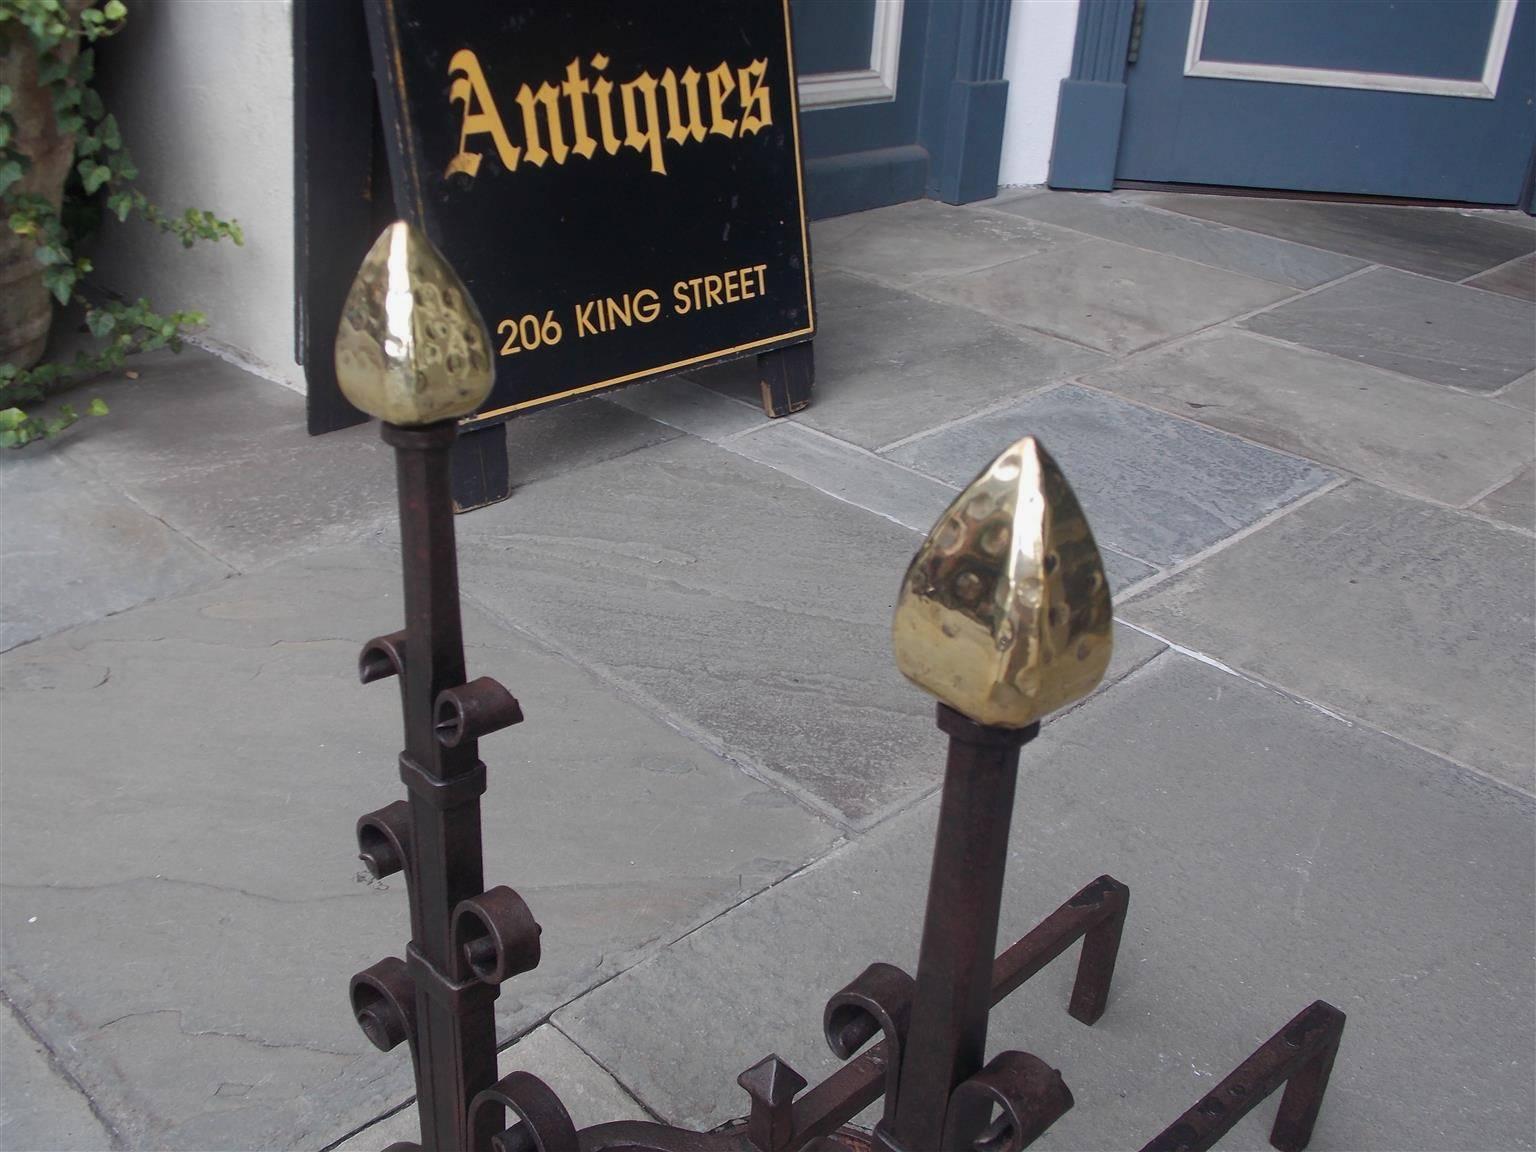 Hammered American Wrought Iron and Brass Faceted Arrow Finial Scrolled Andirons, C. 1850